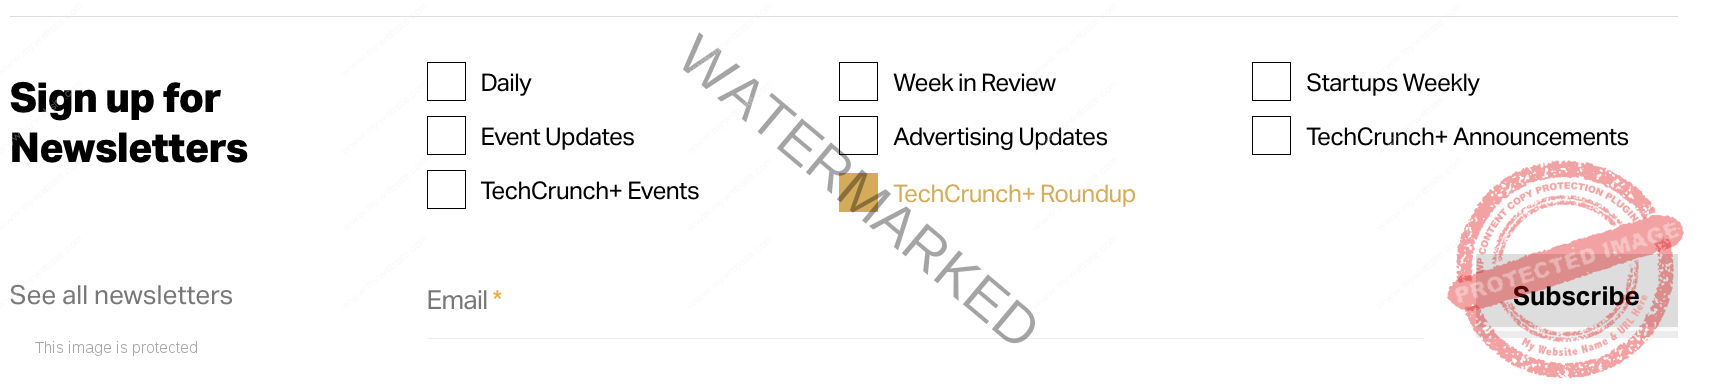 sign up for the TechCrunch+ roundup newsletter